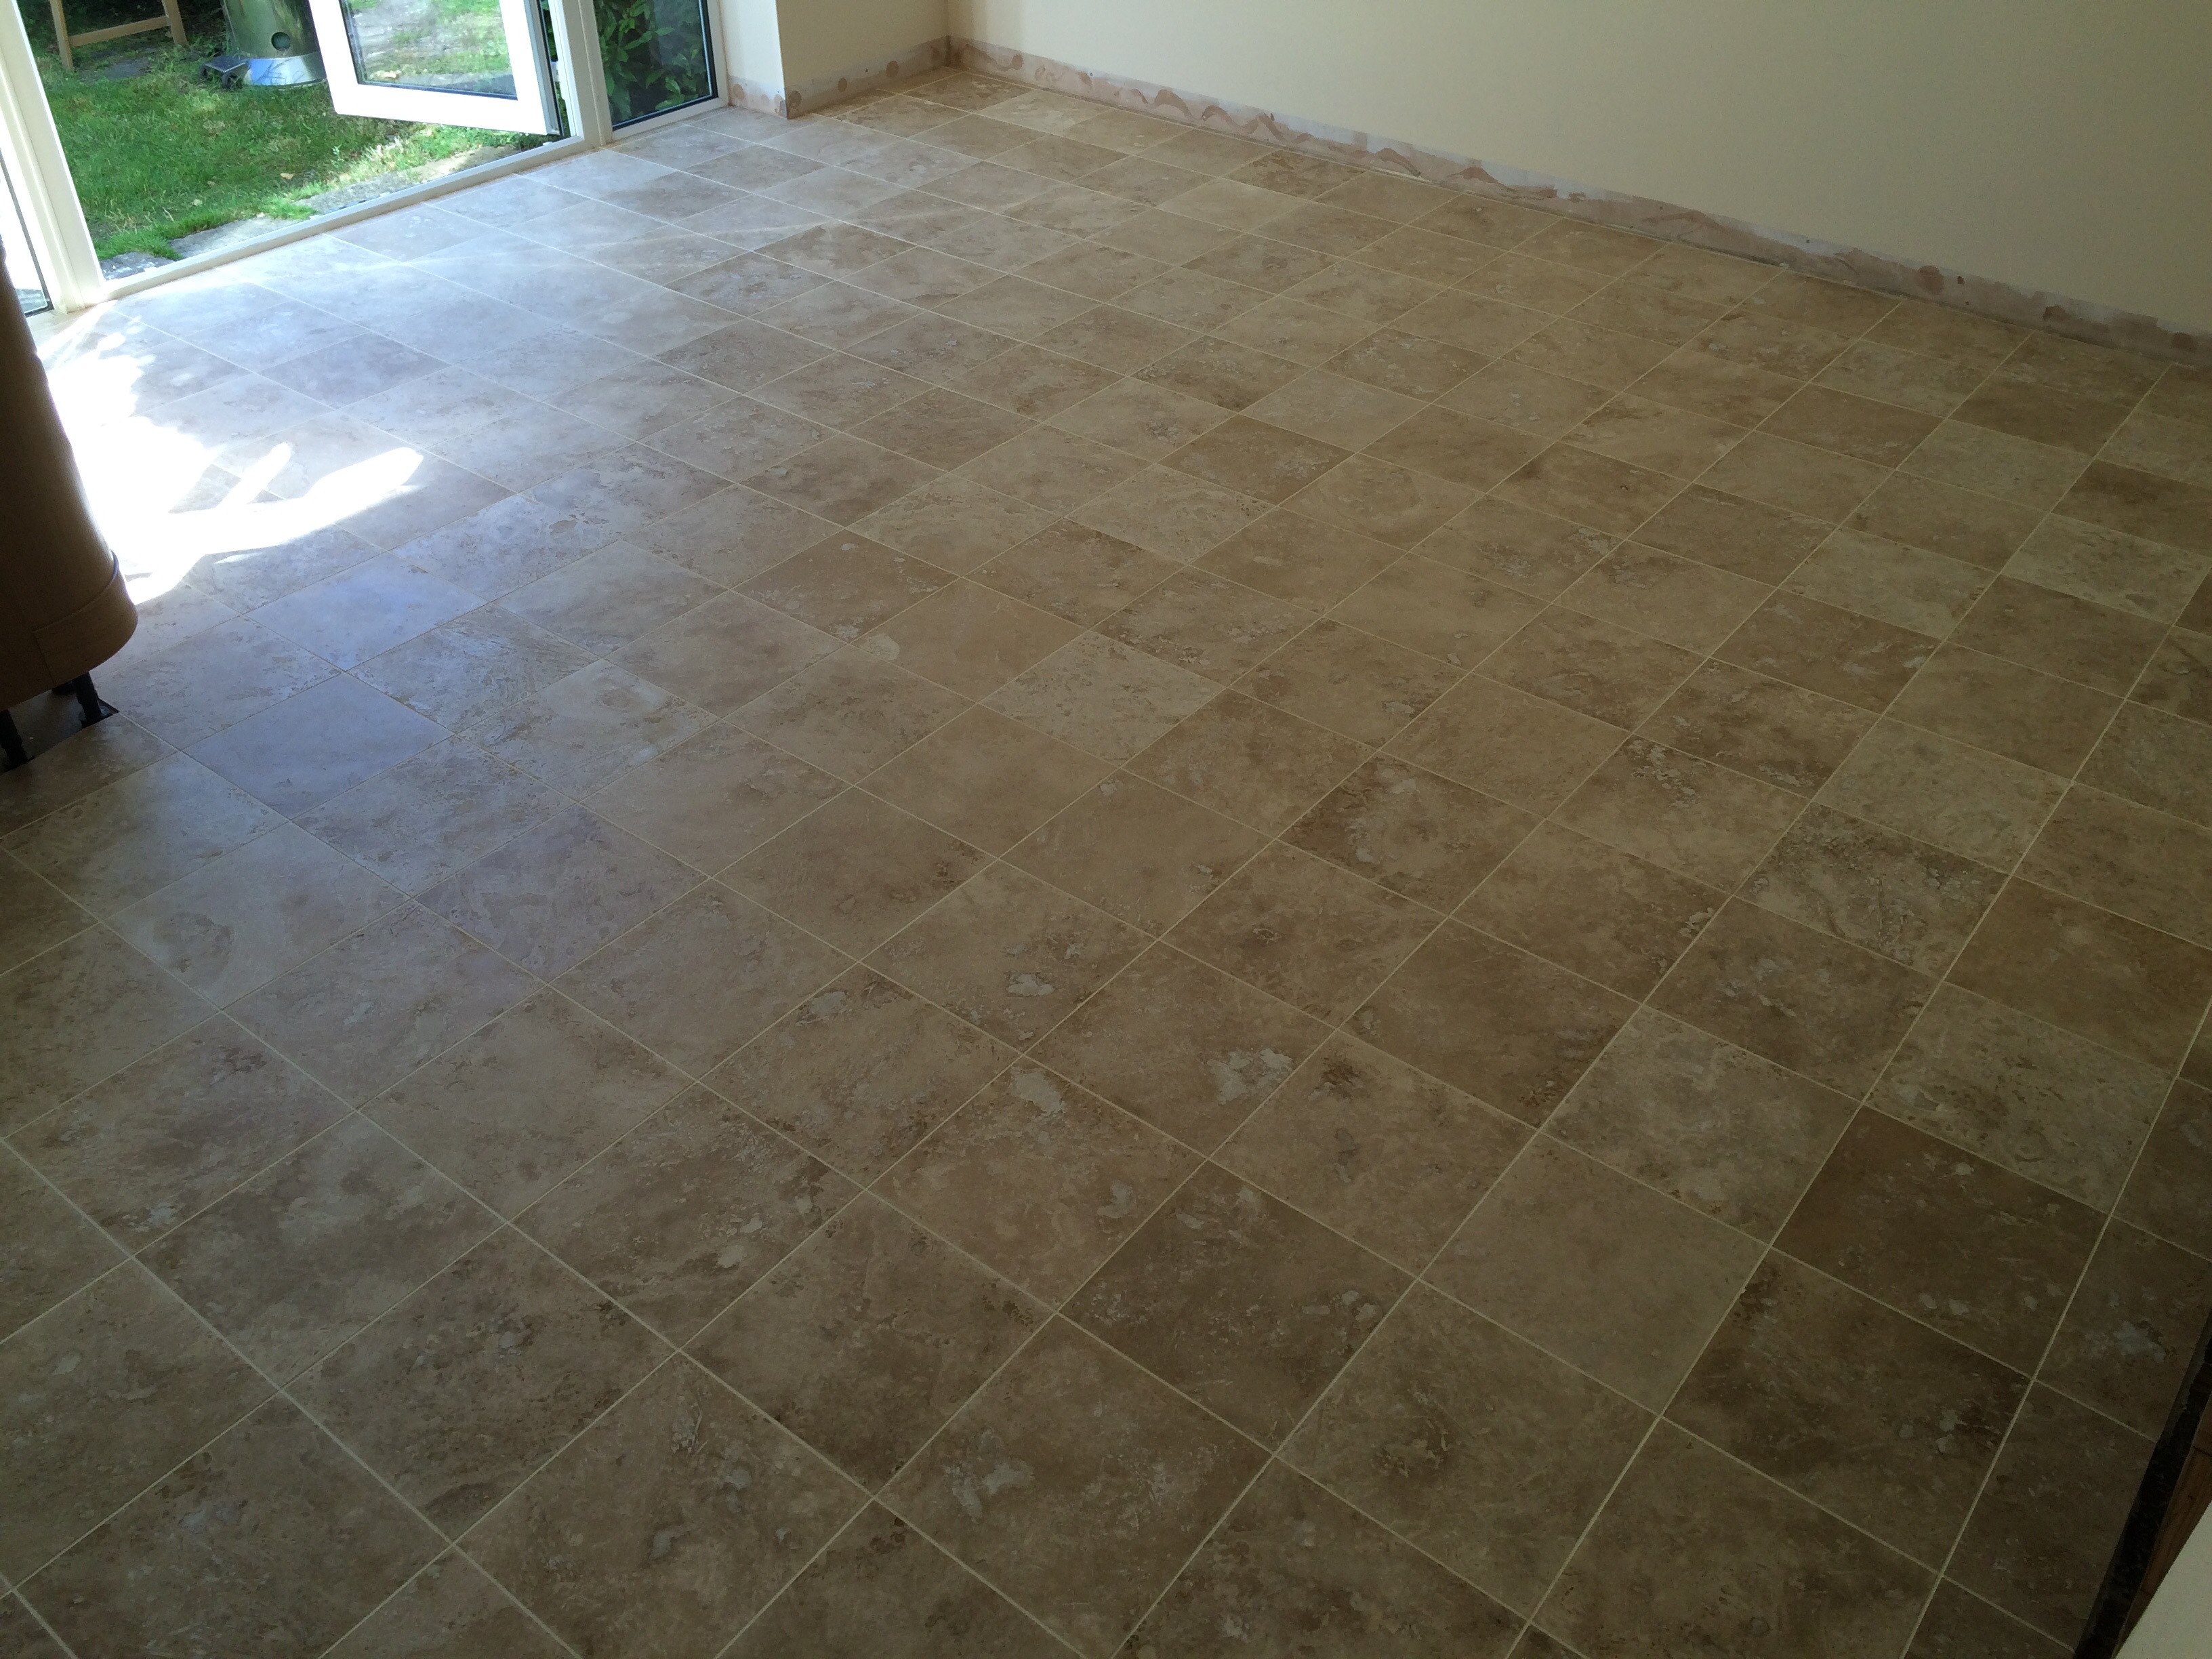 Grouted & sealed